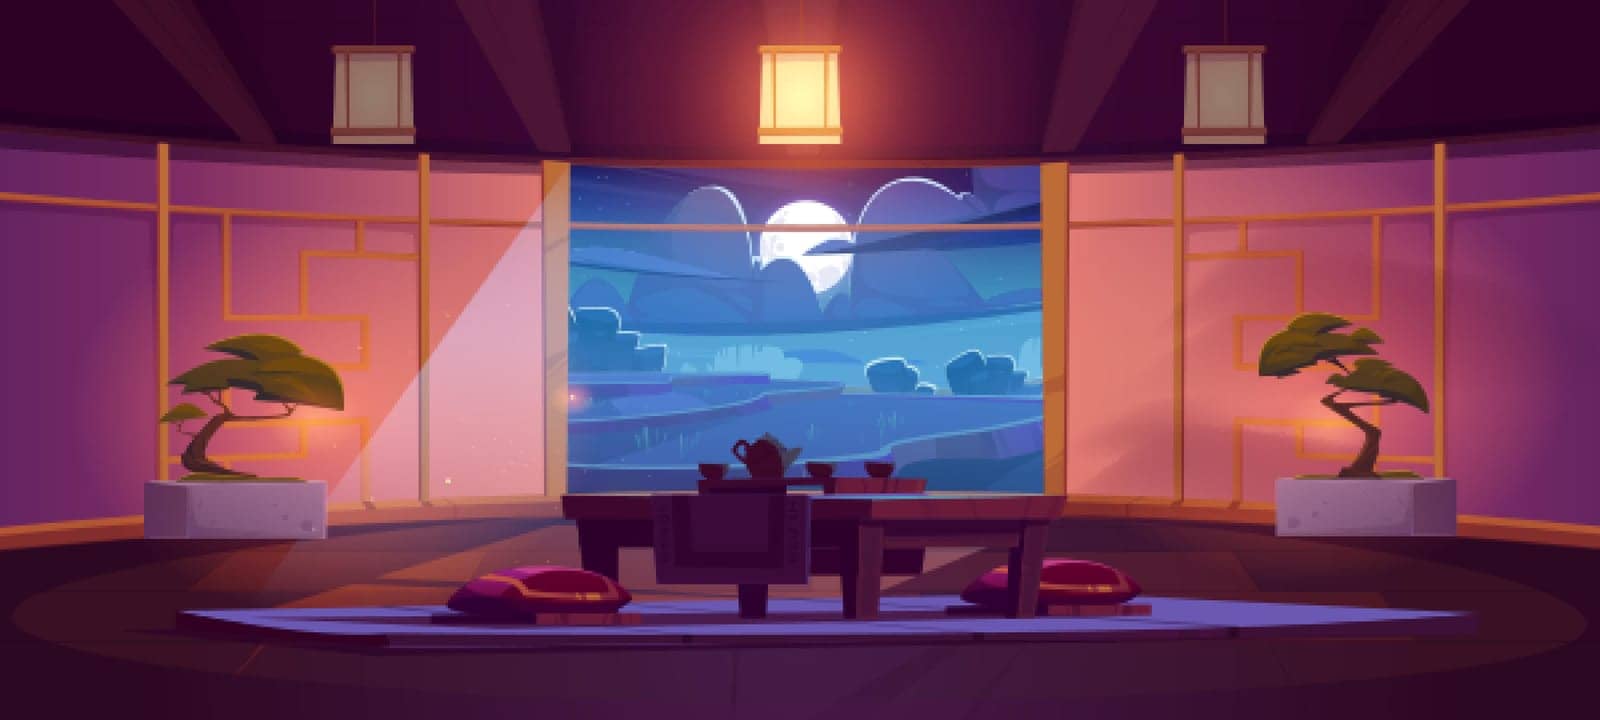 Traditional japanese room with cups and teapot on table, red cushions and bonsai. Japanese tea ceremony at night. Vector cartoon interior of empty house with furniture and moon in sky behind window